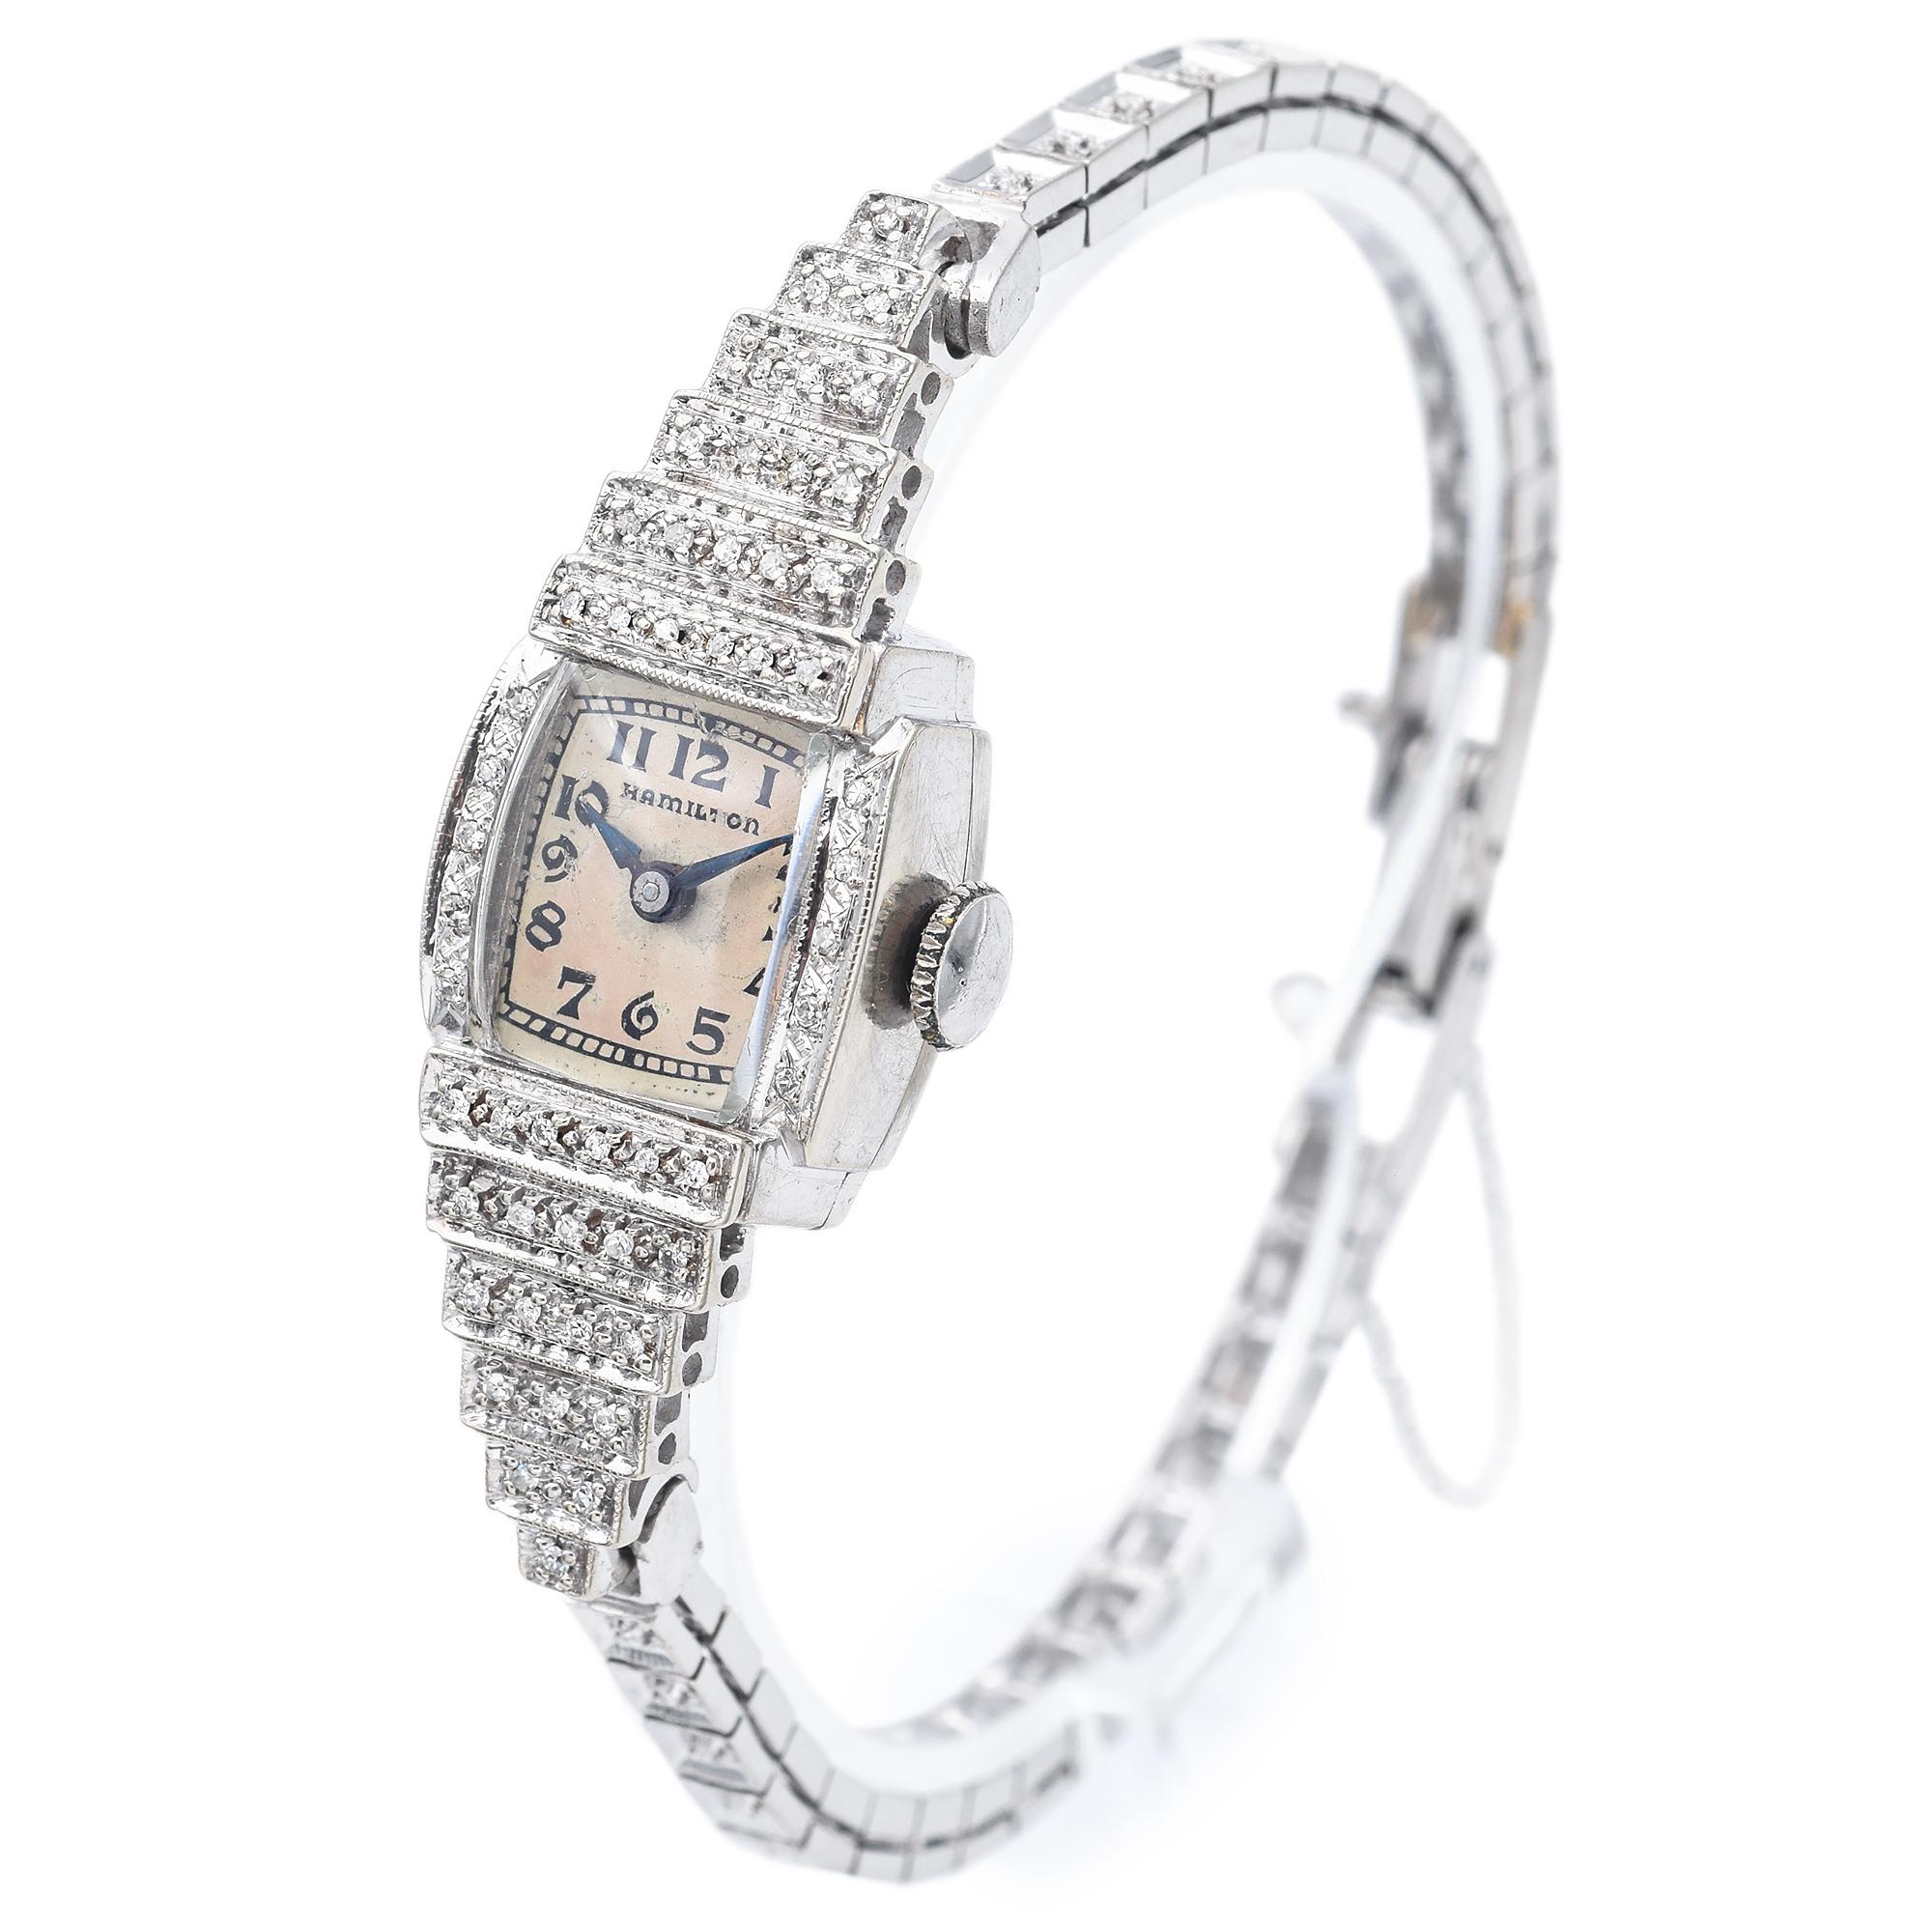 Good condition, keeping accurate time

Weight:  16.5 Grams
Case Size: 14 mm
Stone: Approx 0.41 TCW (0.005 ct) Diamonds
Band Length: 6 Inches
Hallmark: 14K

ITEM #:BR-1062-092823-16